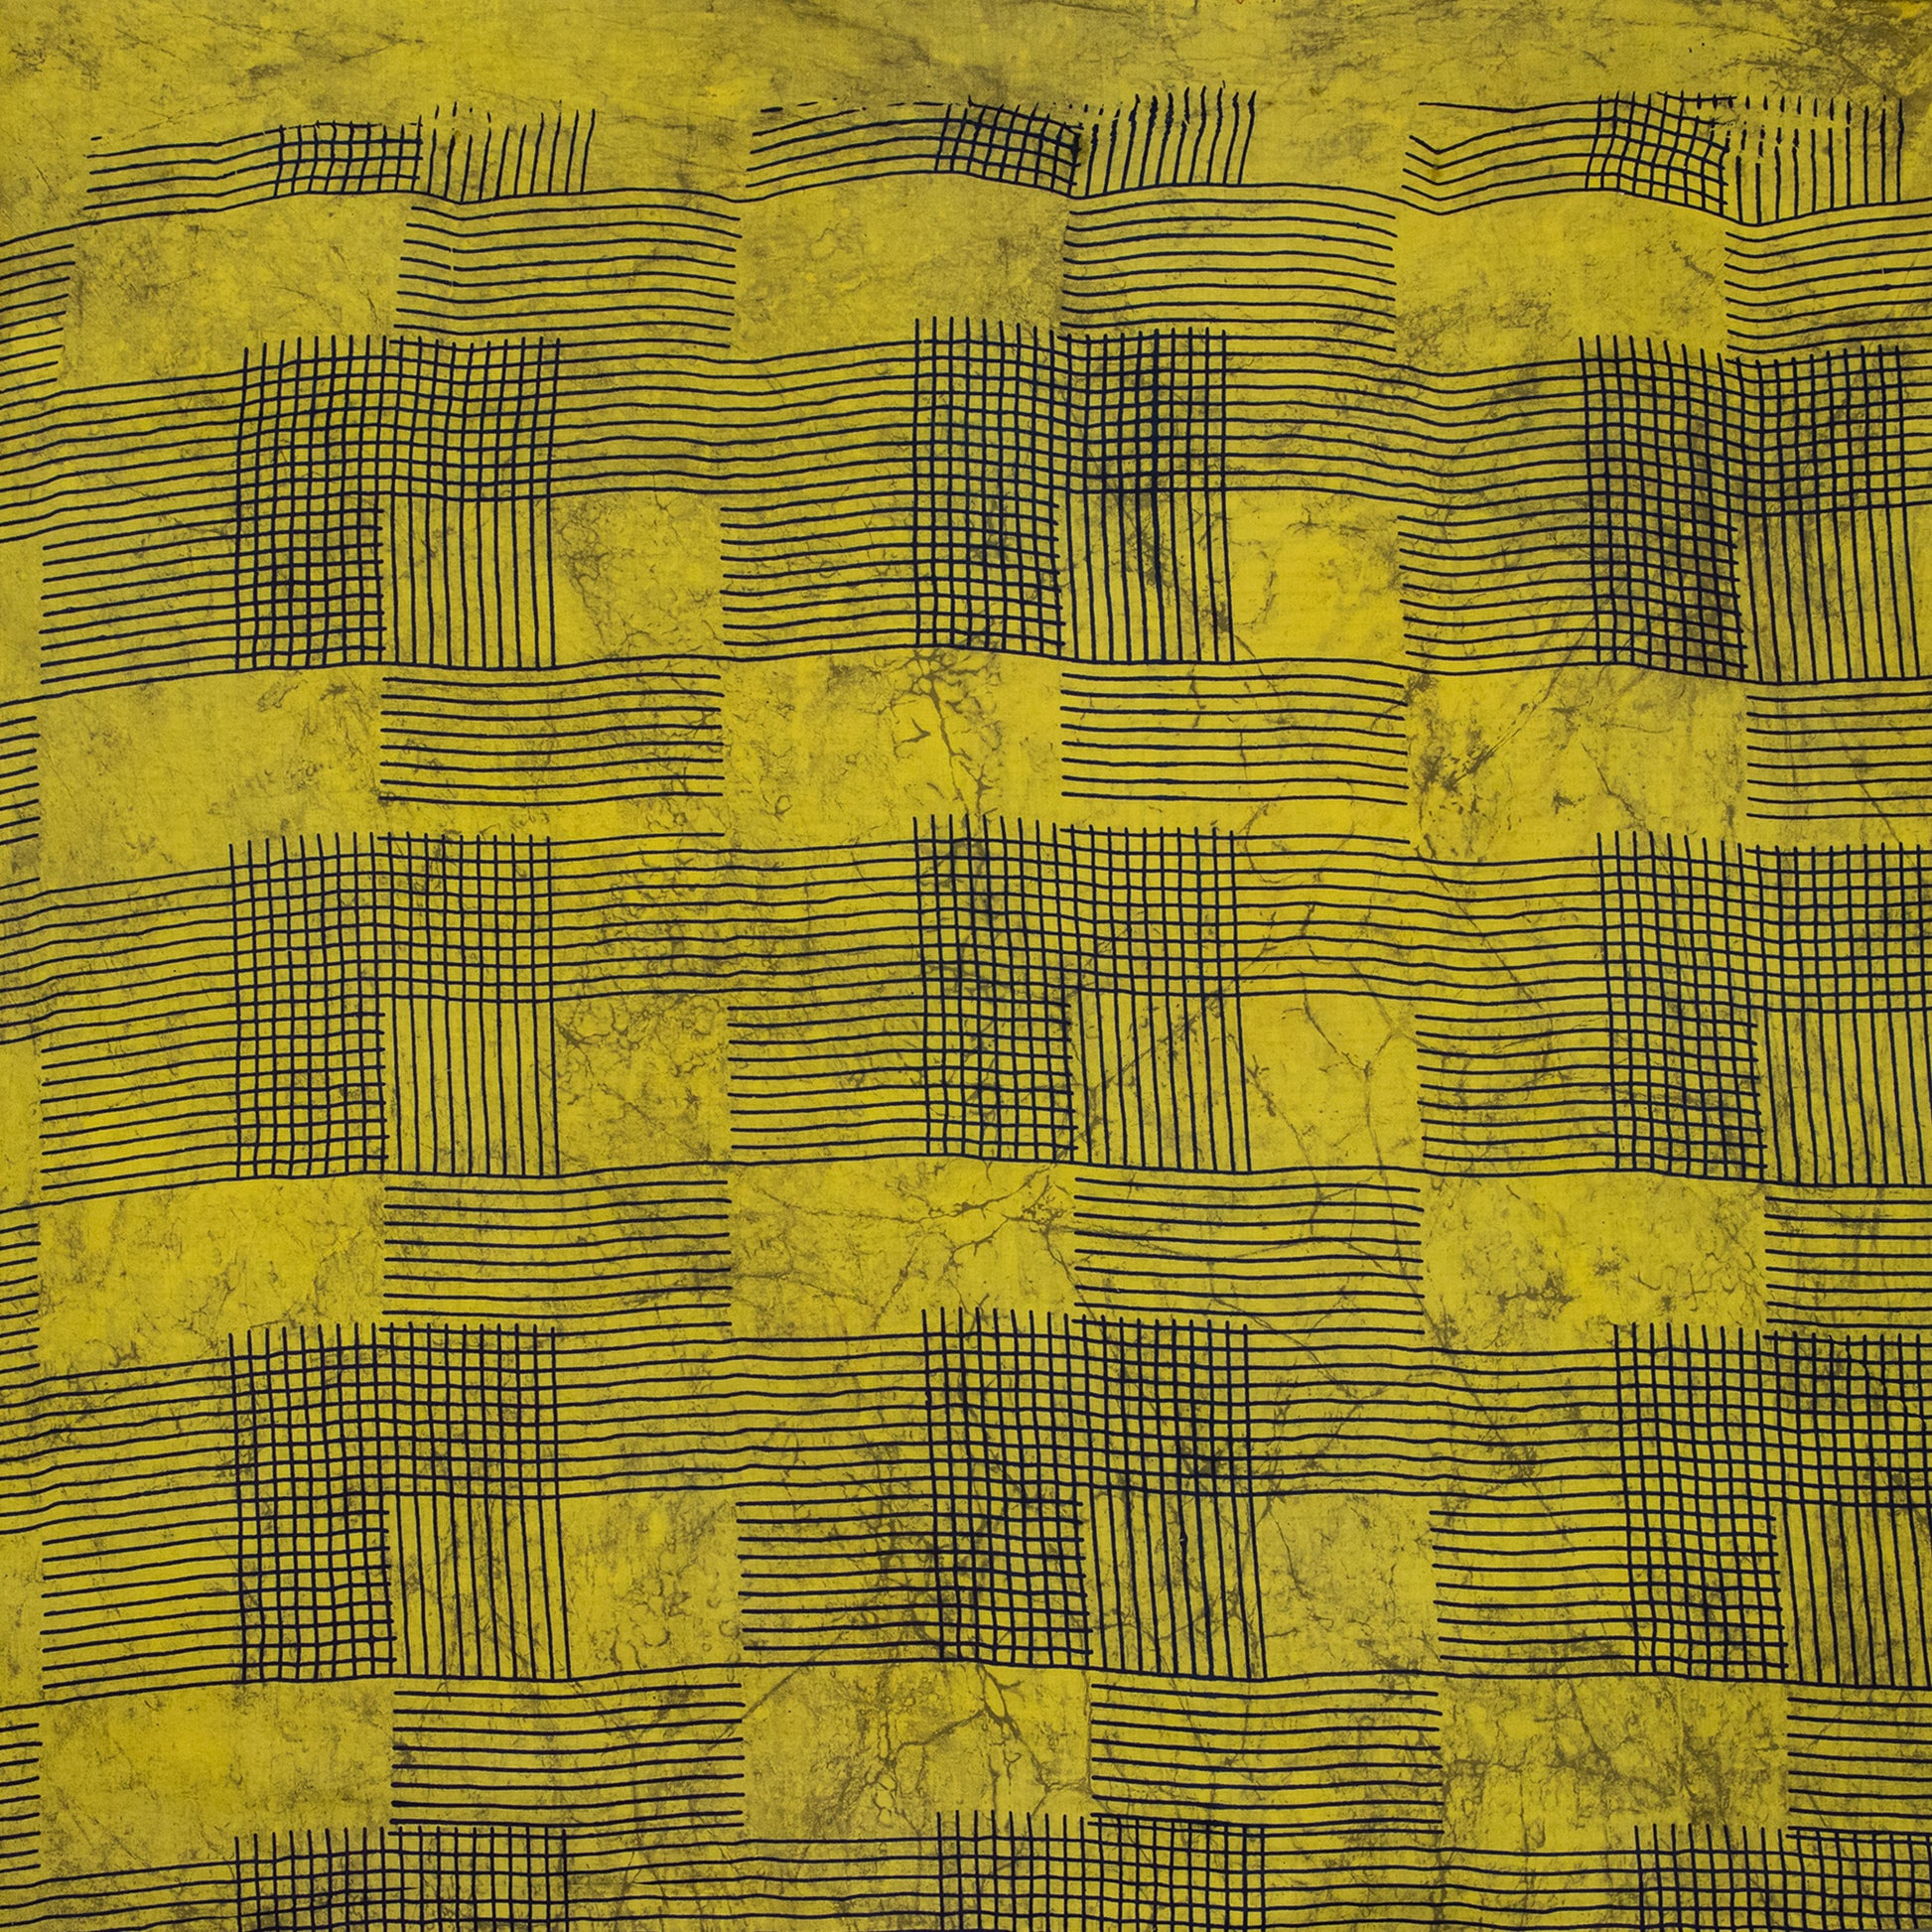 Handmade Natural Dyed Yellow Printed Cotton Fabric Online